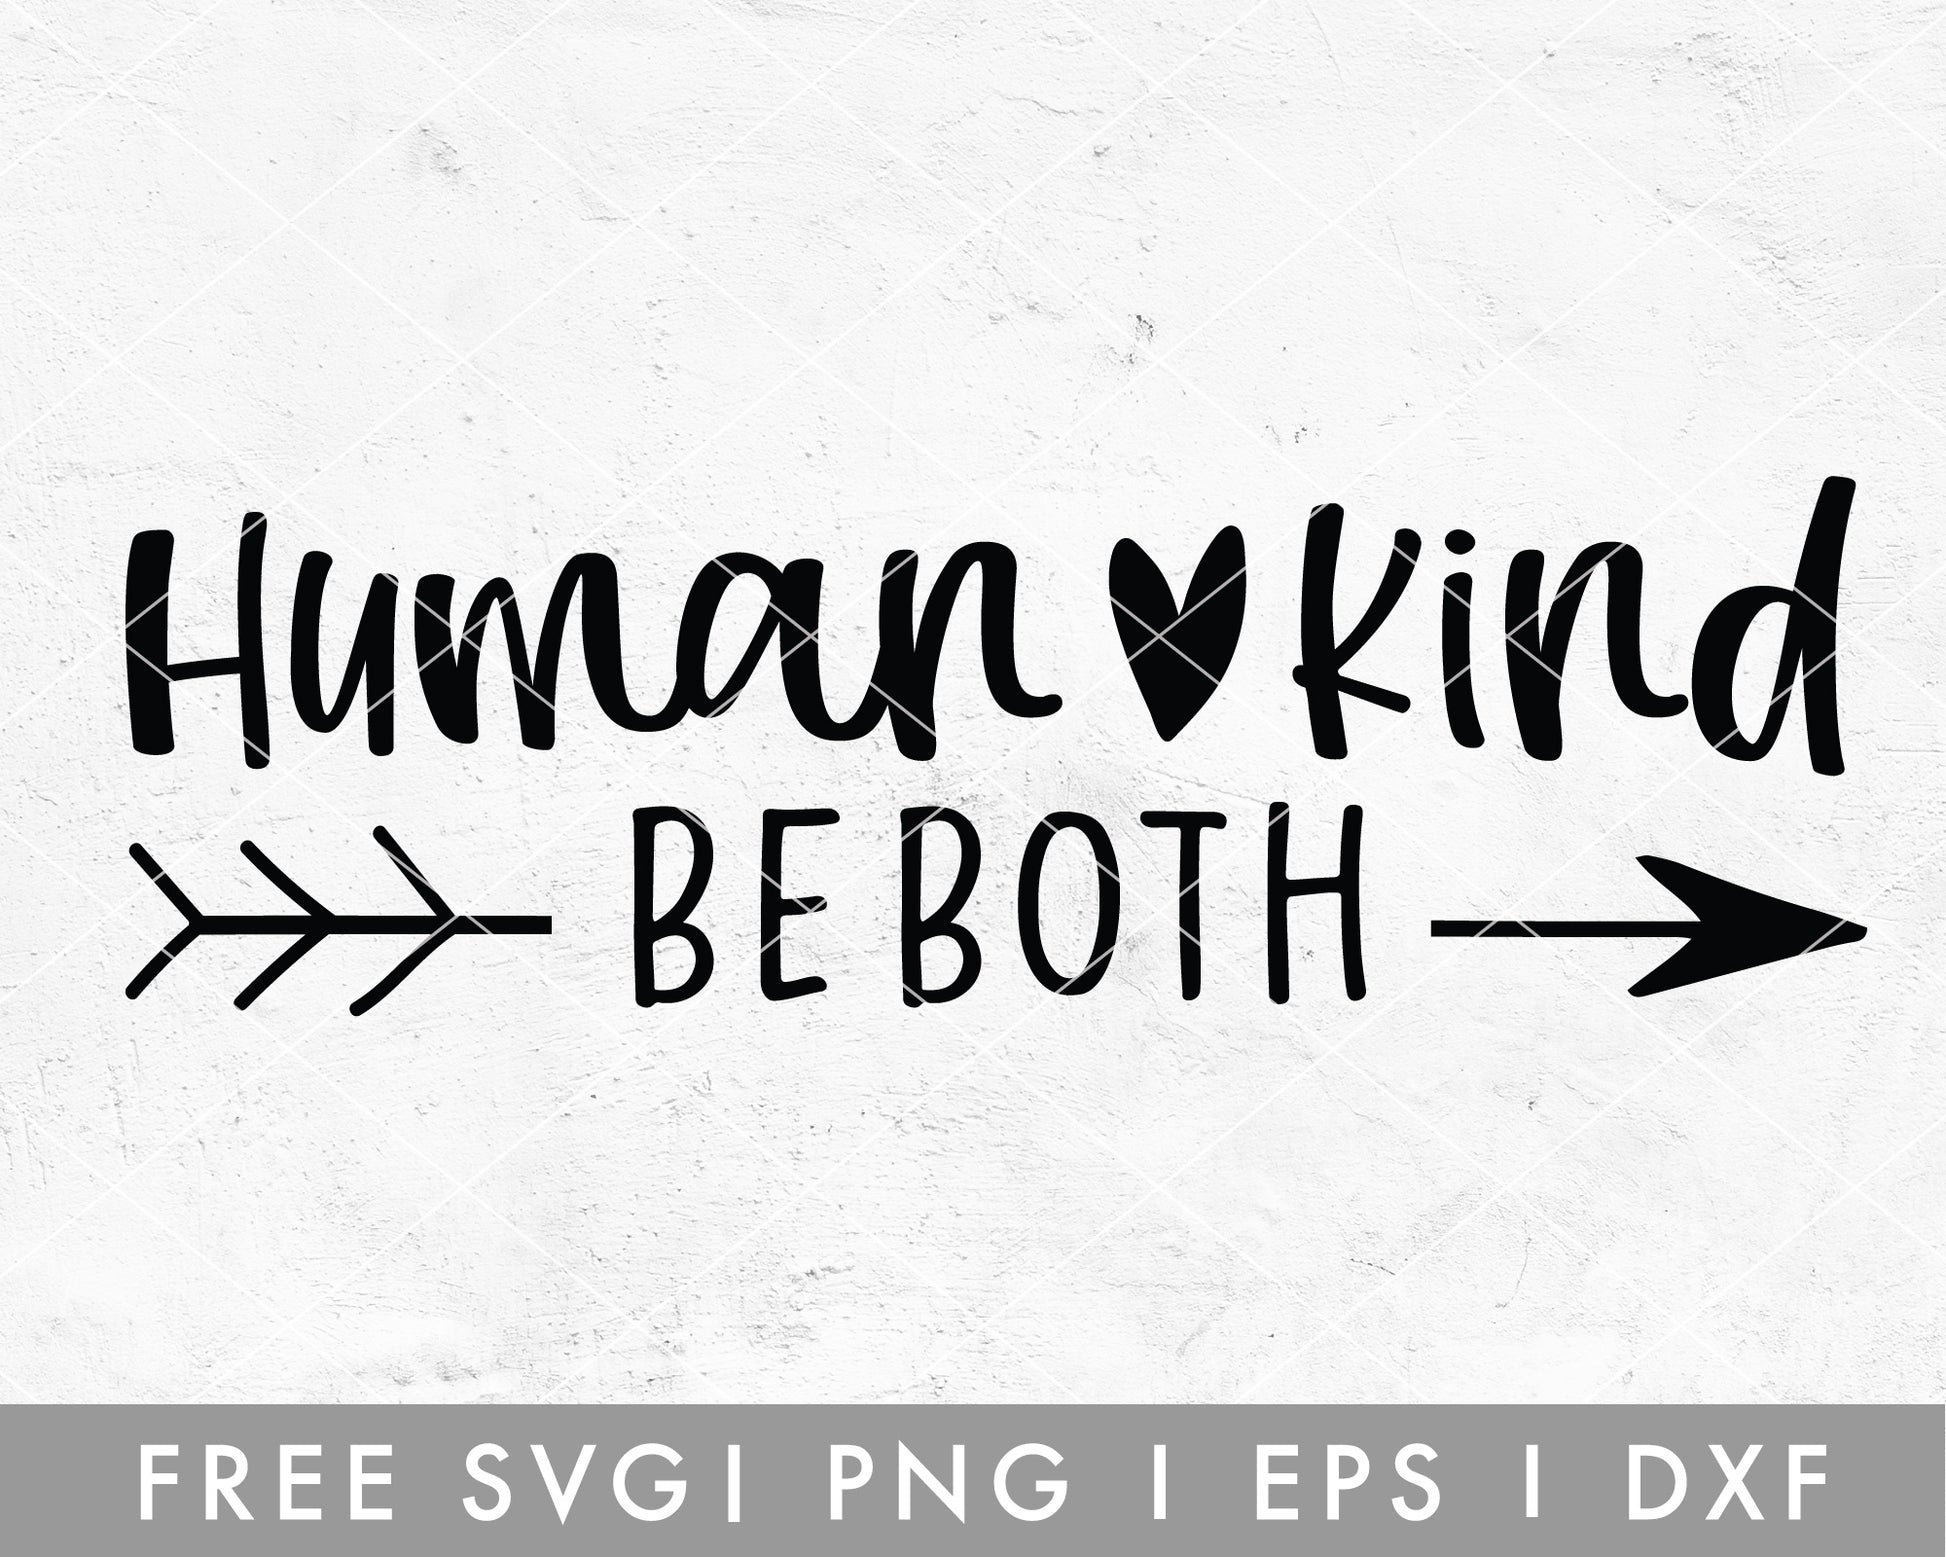 FREE Inspirational SVG | Human Kind Be Both Cut File for Cricut, Cameo Silhouette | Free SVG Cut File